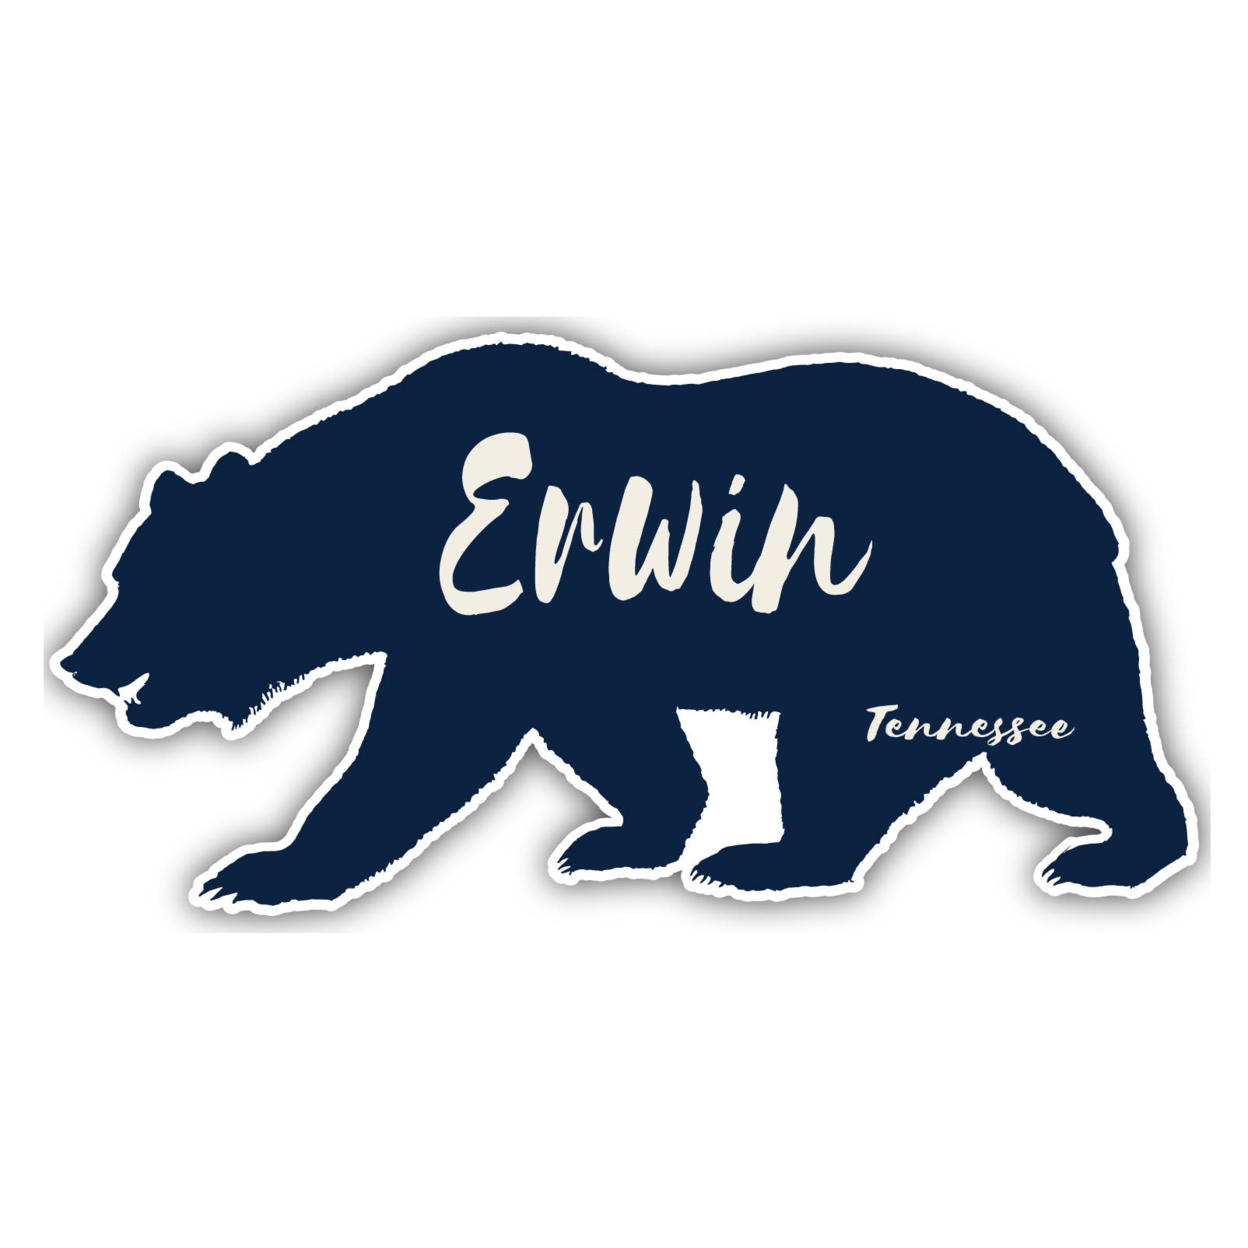 Erwin Tennessee Souvenir Decorative Stickers (Choose Theme And Size) - 4-Pack, 4-Inch, Bear